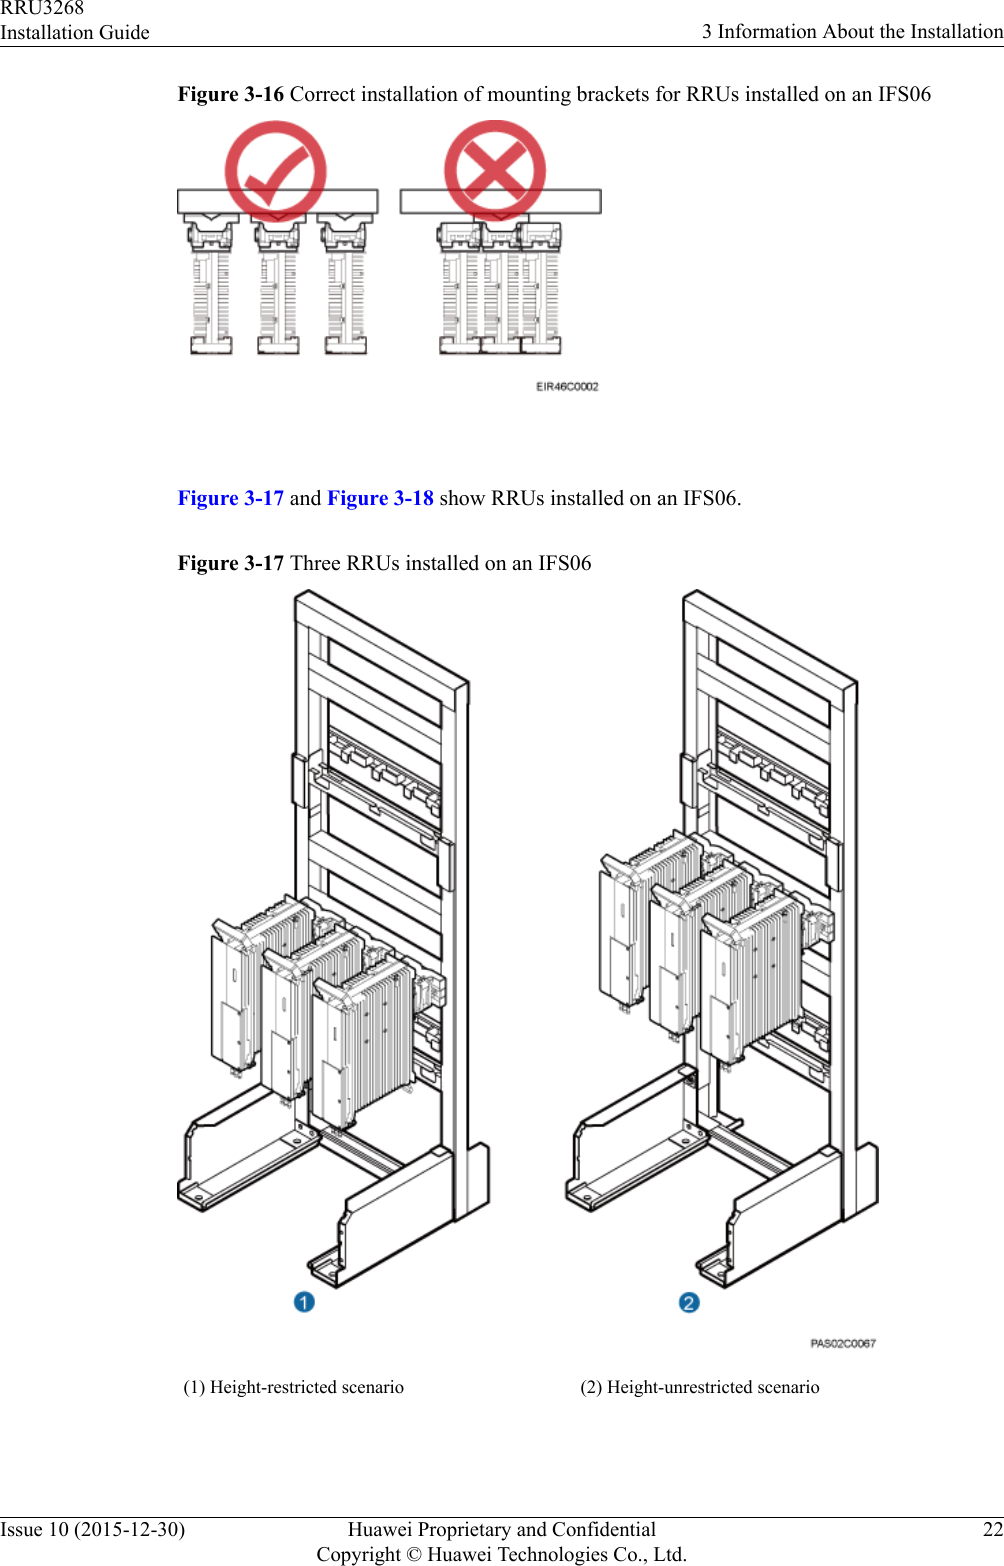 Figure 3-16 Correct installation of mounting brackets for RRUs installed on an IFS06 Figure 3-17 and Figure 3-18 show RRUs installed on an IFS06.Figure 3-17 Three RRUs installed on an IFS06(1) Height-restricted scenario (2) Height-unrestricted scenario RRU3268Installation Guide 3 Information About the InstallationIssue 10 (2015-12-30) Huawei Proprietary and ConfidentialCopyright © Huawei Technologies Co., Ltd.22